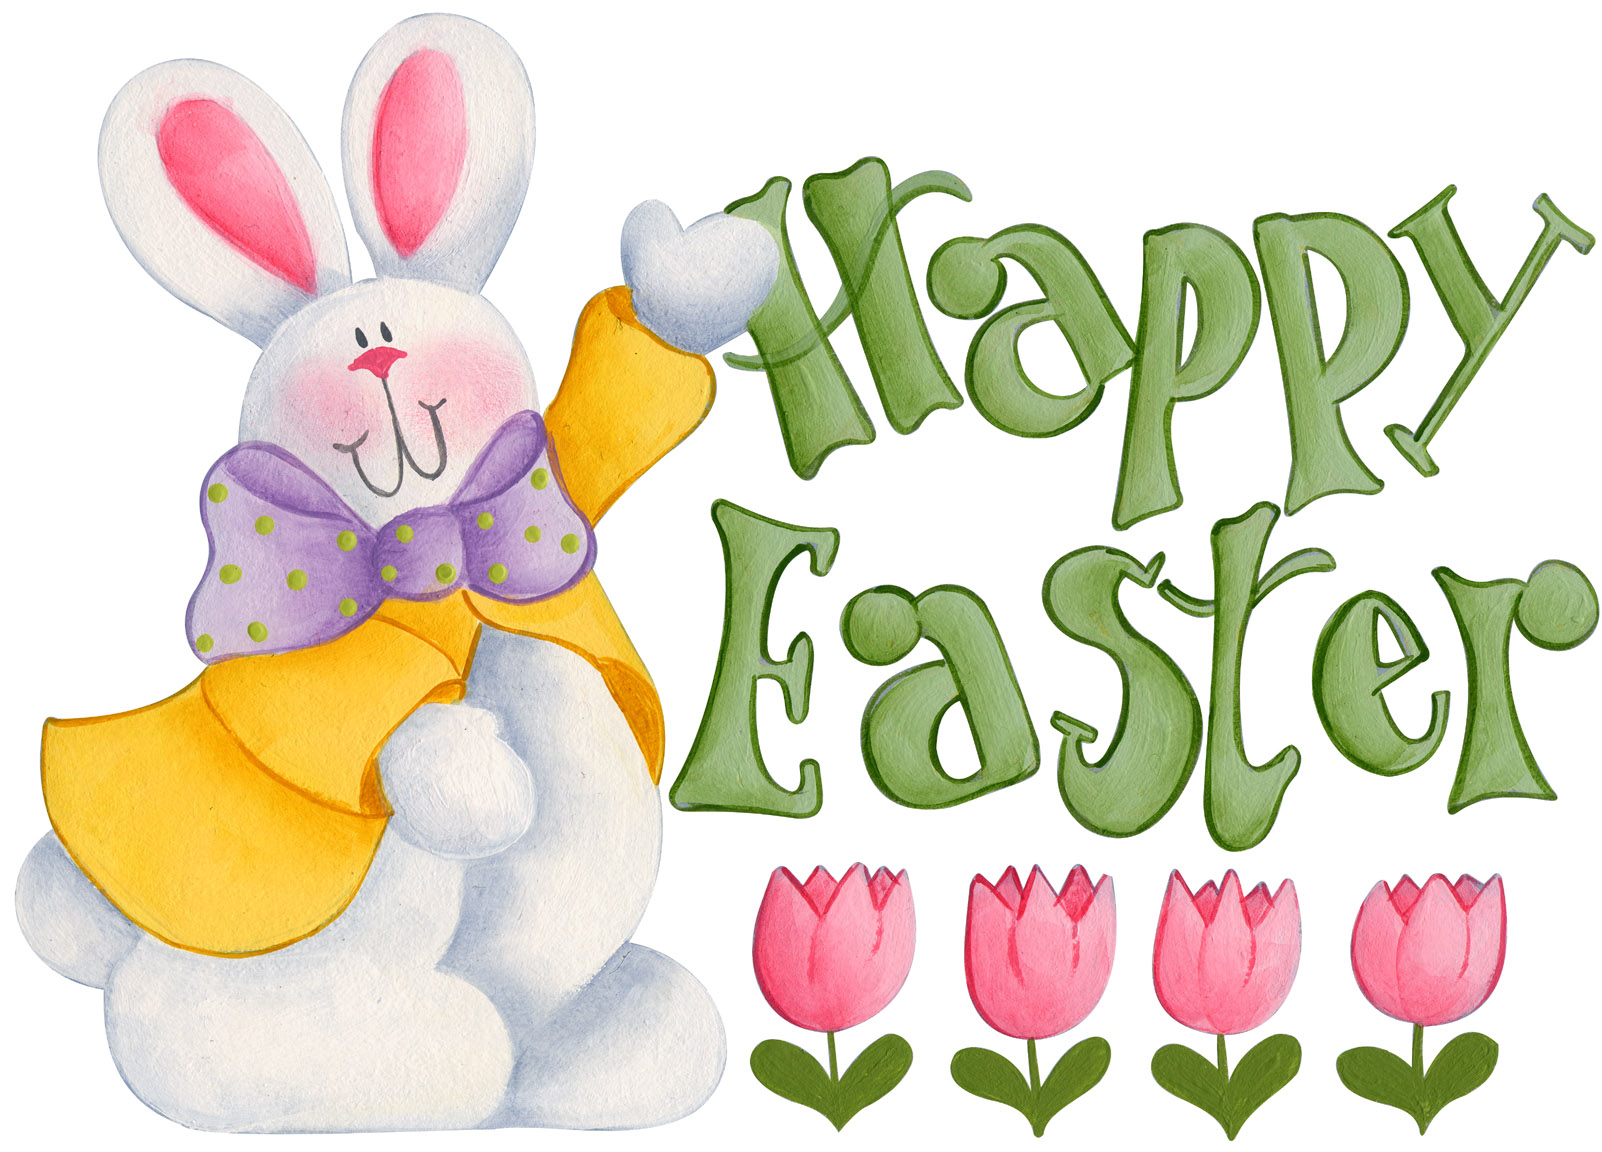 Happy Easter 2014 SMS, Sayings, Quotes, Text messages, Status for